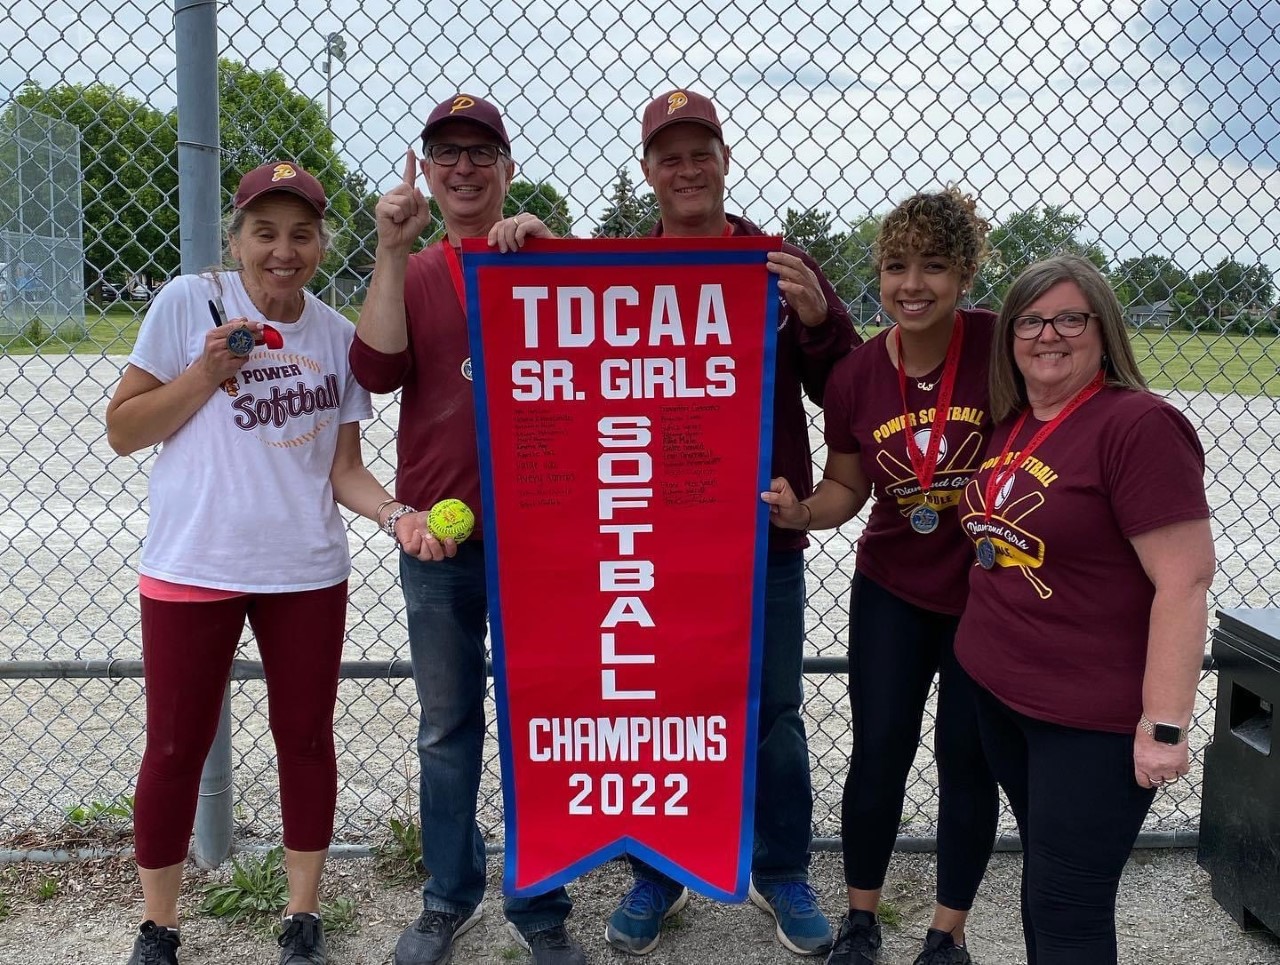 Girls softball coaches with championship banner